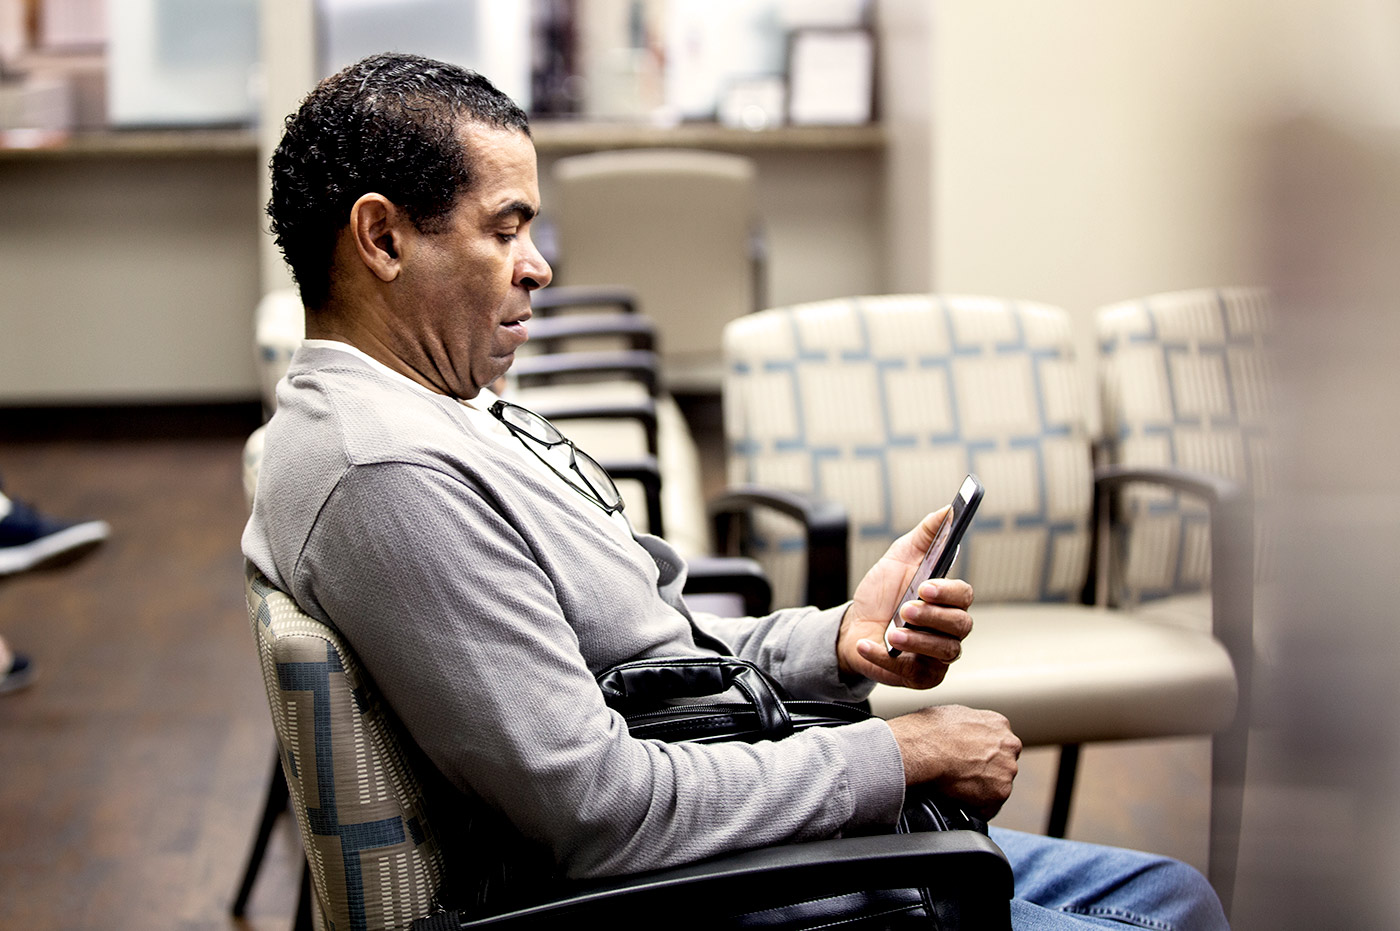 A man in a doctor's office waiting room looking at his cell phone.